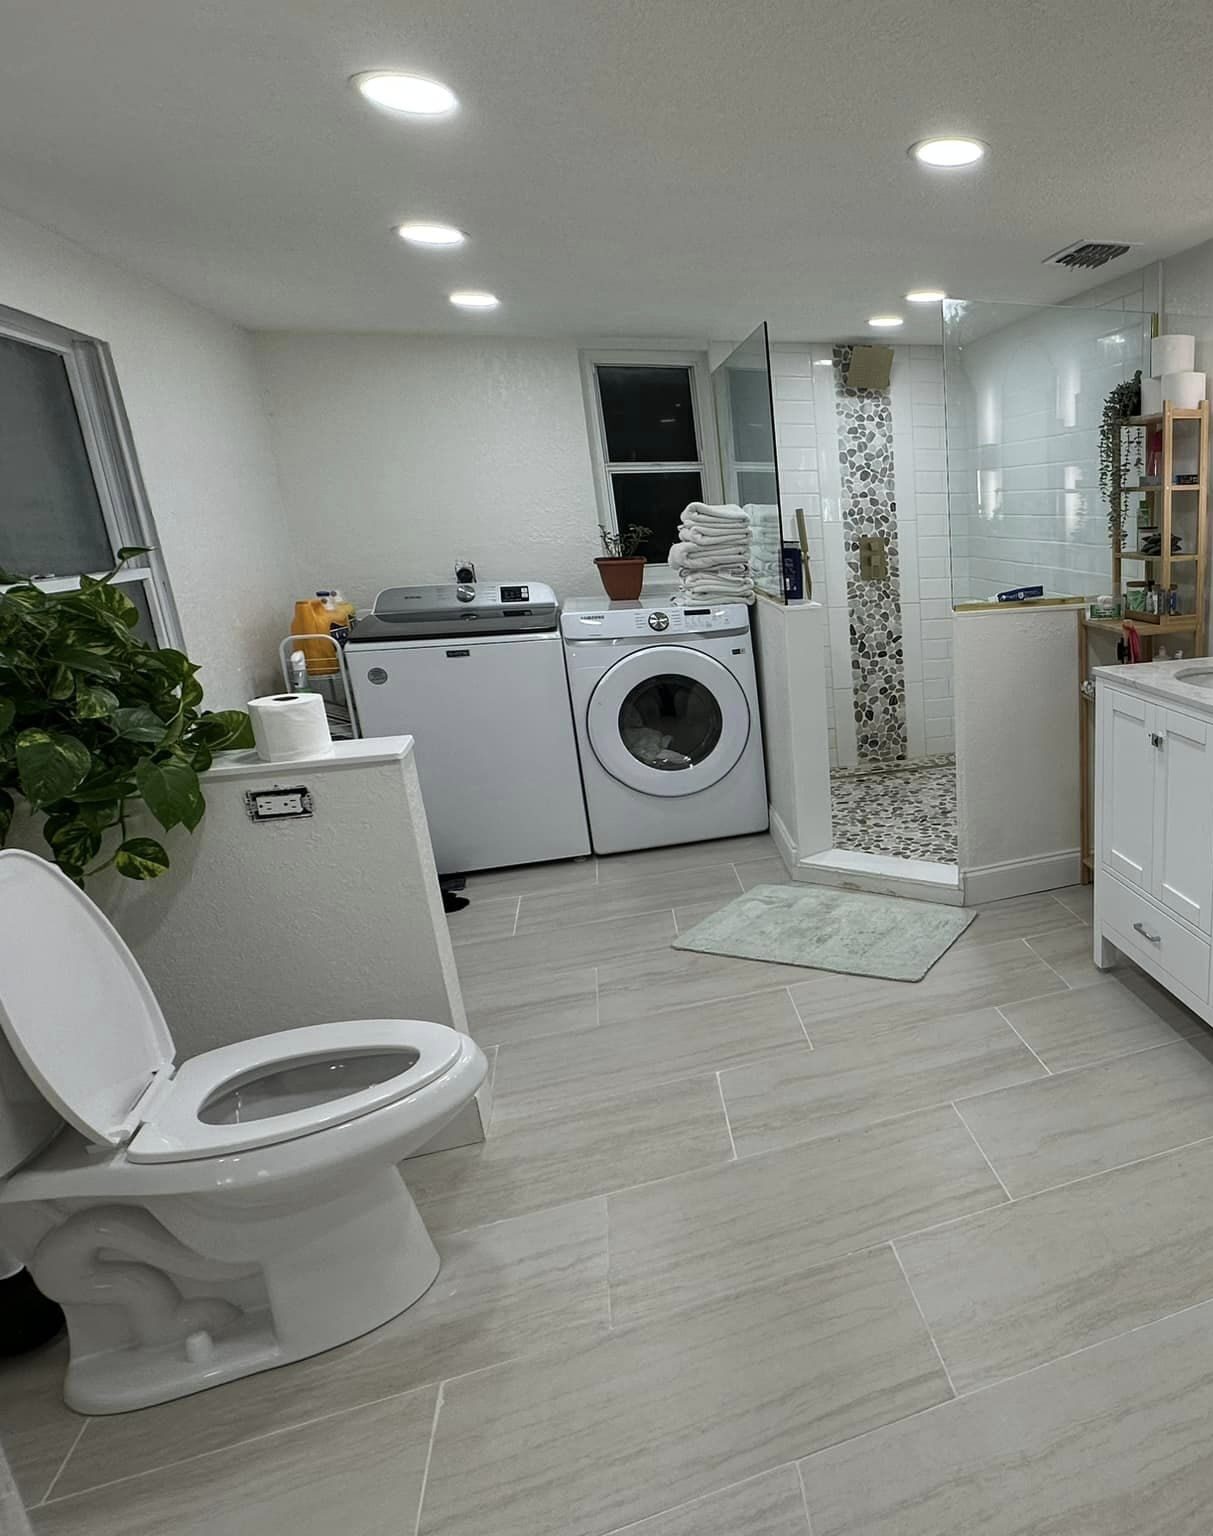 Laundry room after image